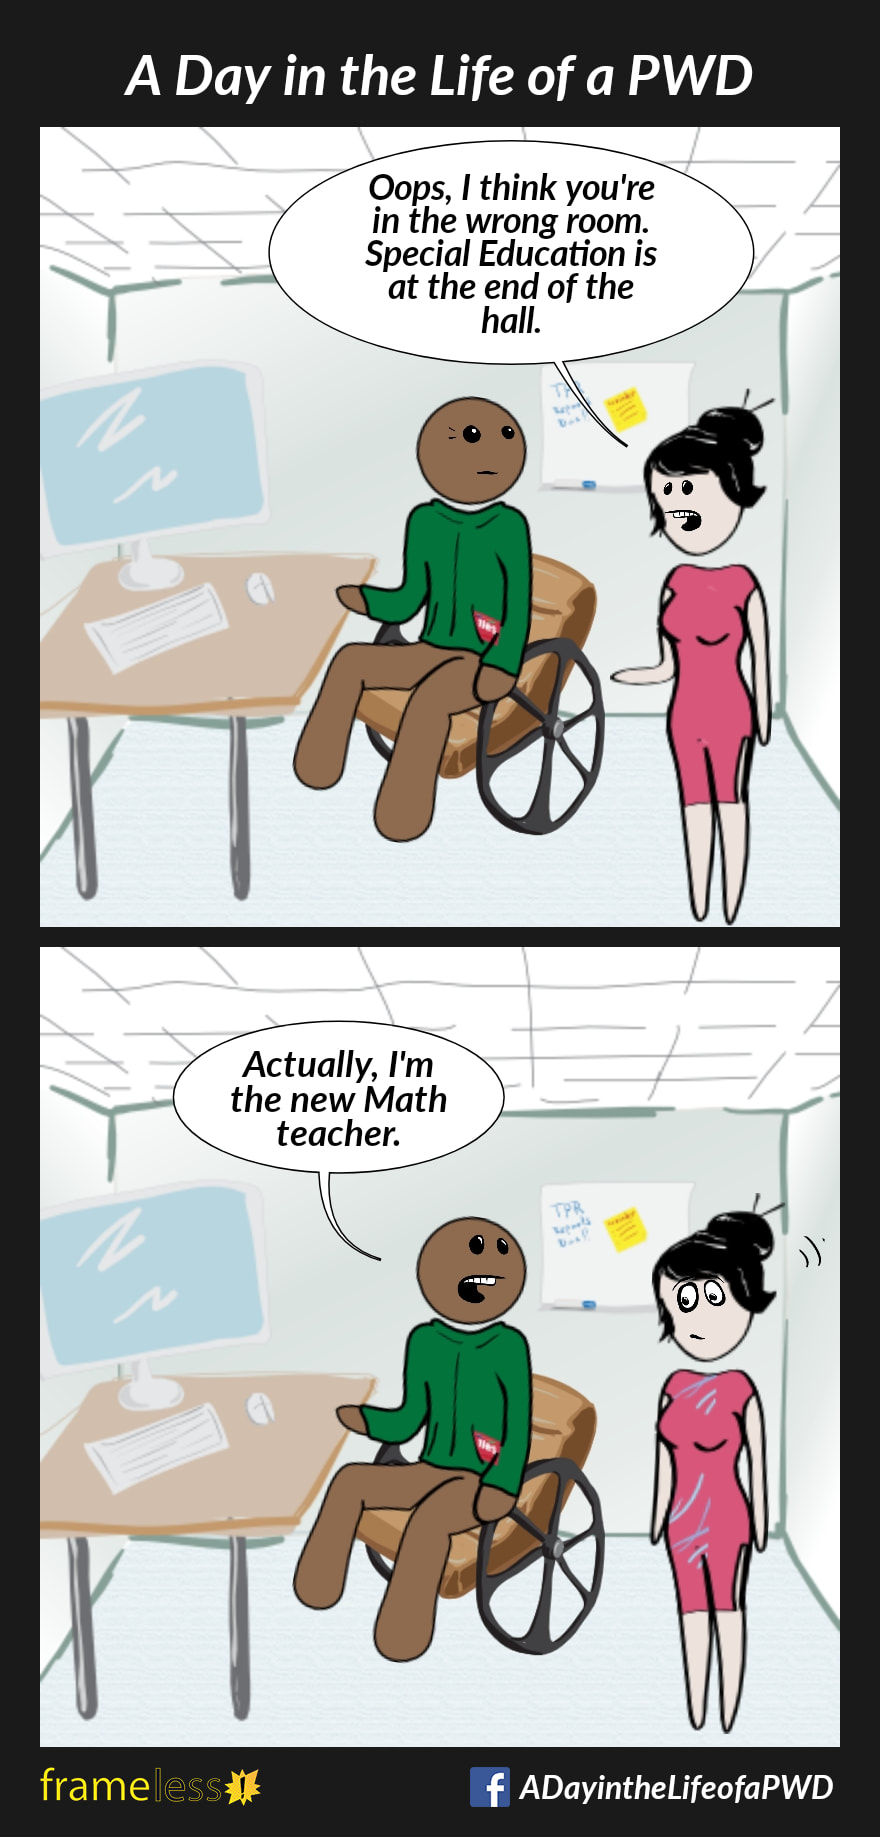 COMIC STRIP 
A Day in the Life of a PWD (Person With a Disability) 

Frame 1:
A man in a wheelchair is sitting at a computer table in a classroom. 
A woman enters.
WOMAN: Oops, I think you're in the wrong room. Special Education is at the end of the hall.

Frame 2:
MAN: Actually, I'm the new Math teacher.